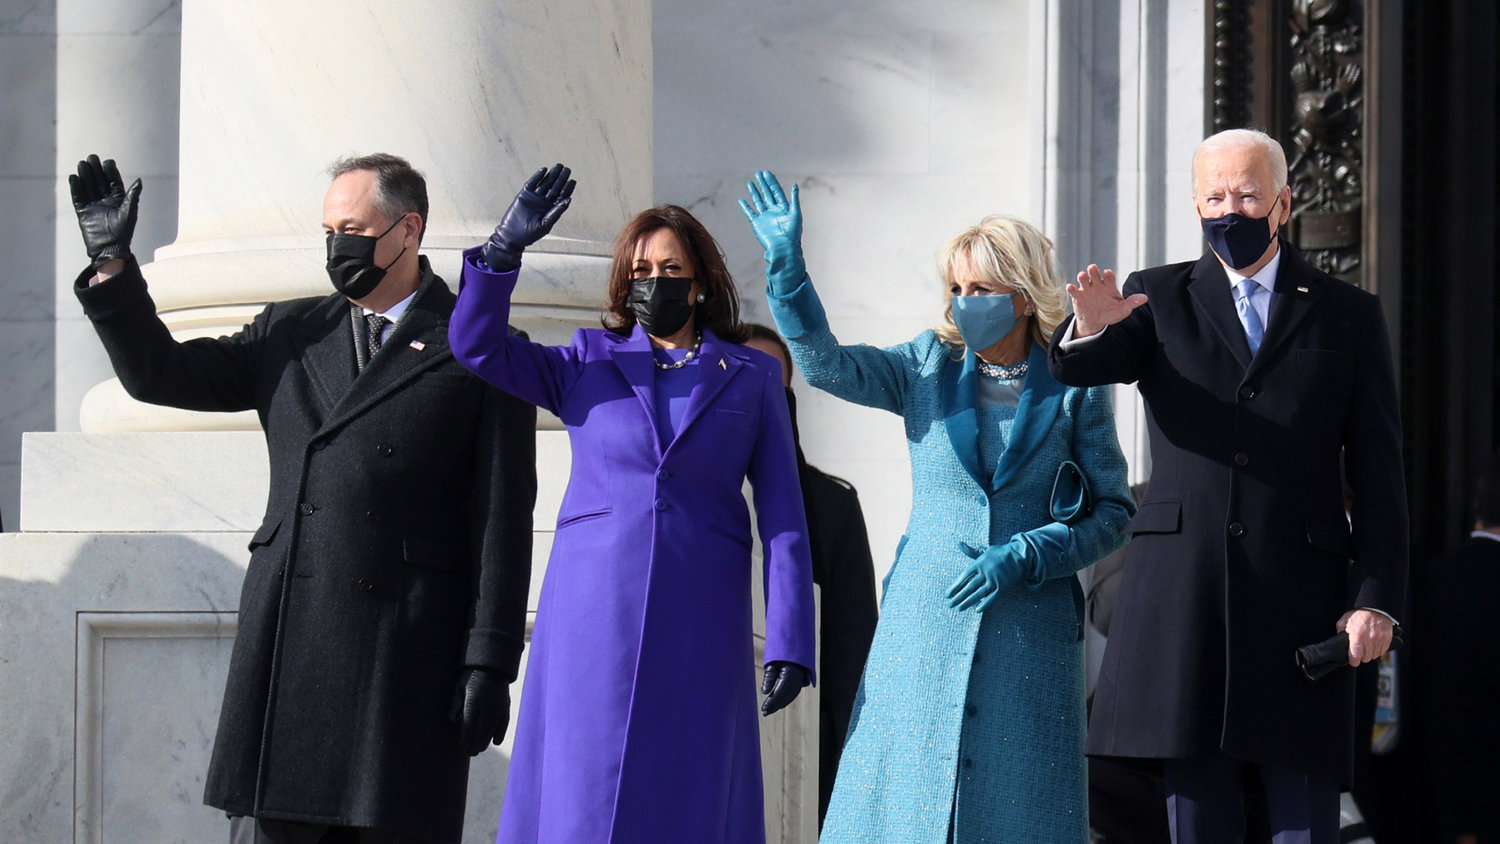 From left, Doug Emhoff, U.S. Vice President Kamala Harris, Dr. Jill Biden and U.S. President Joe Biden wave as they arrive on the East Front of the U.S. Capitol for the inauguration on Wednesday in Washington, DC.